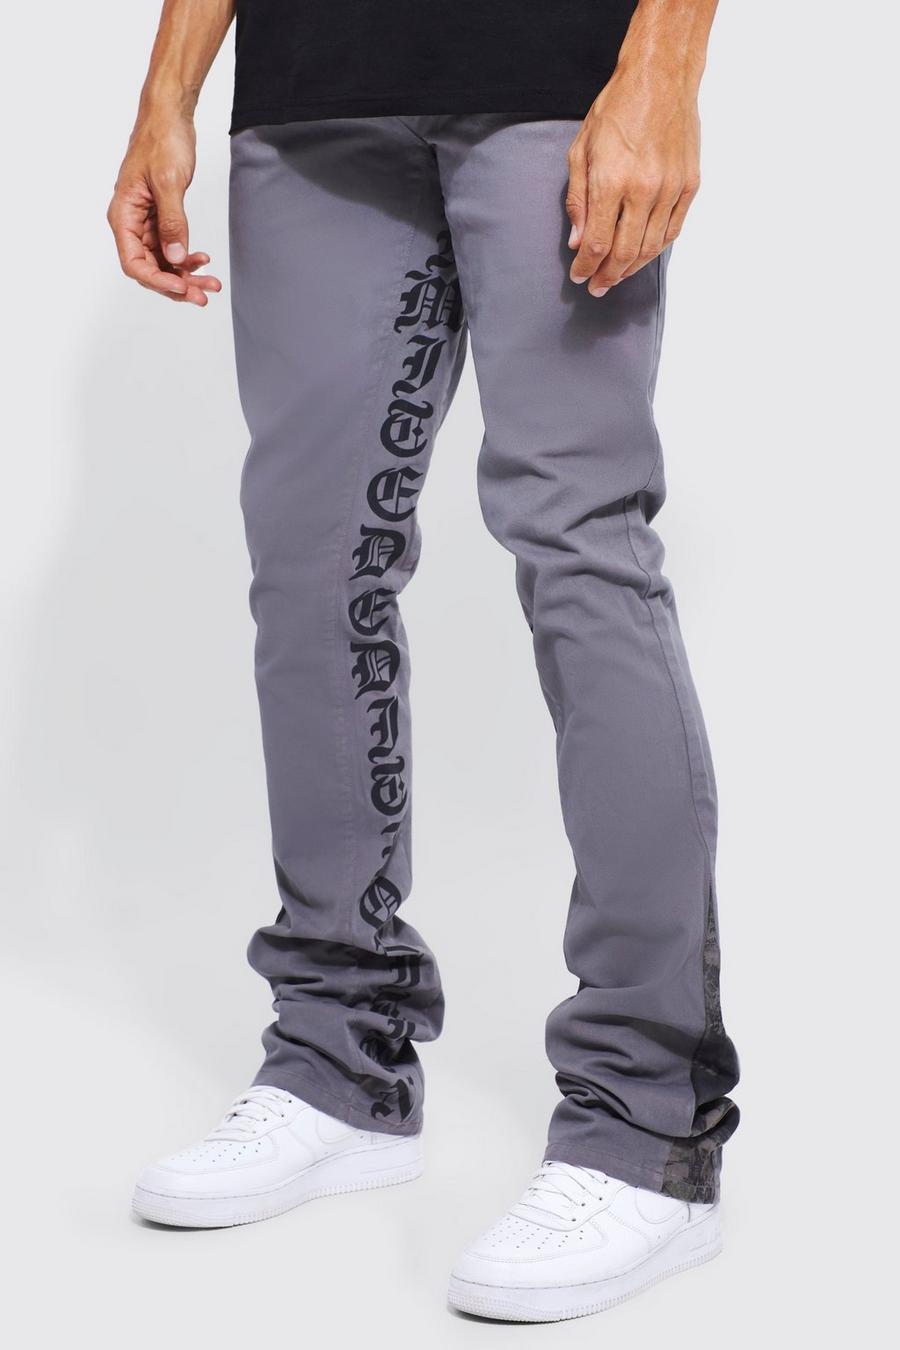 Pantaloni Cargo Tall in fantasia militare con inserti Skinny Fit fissi, Charcoal gris image number 1